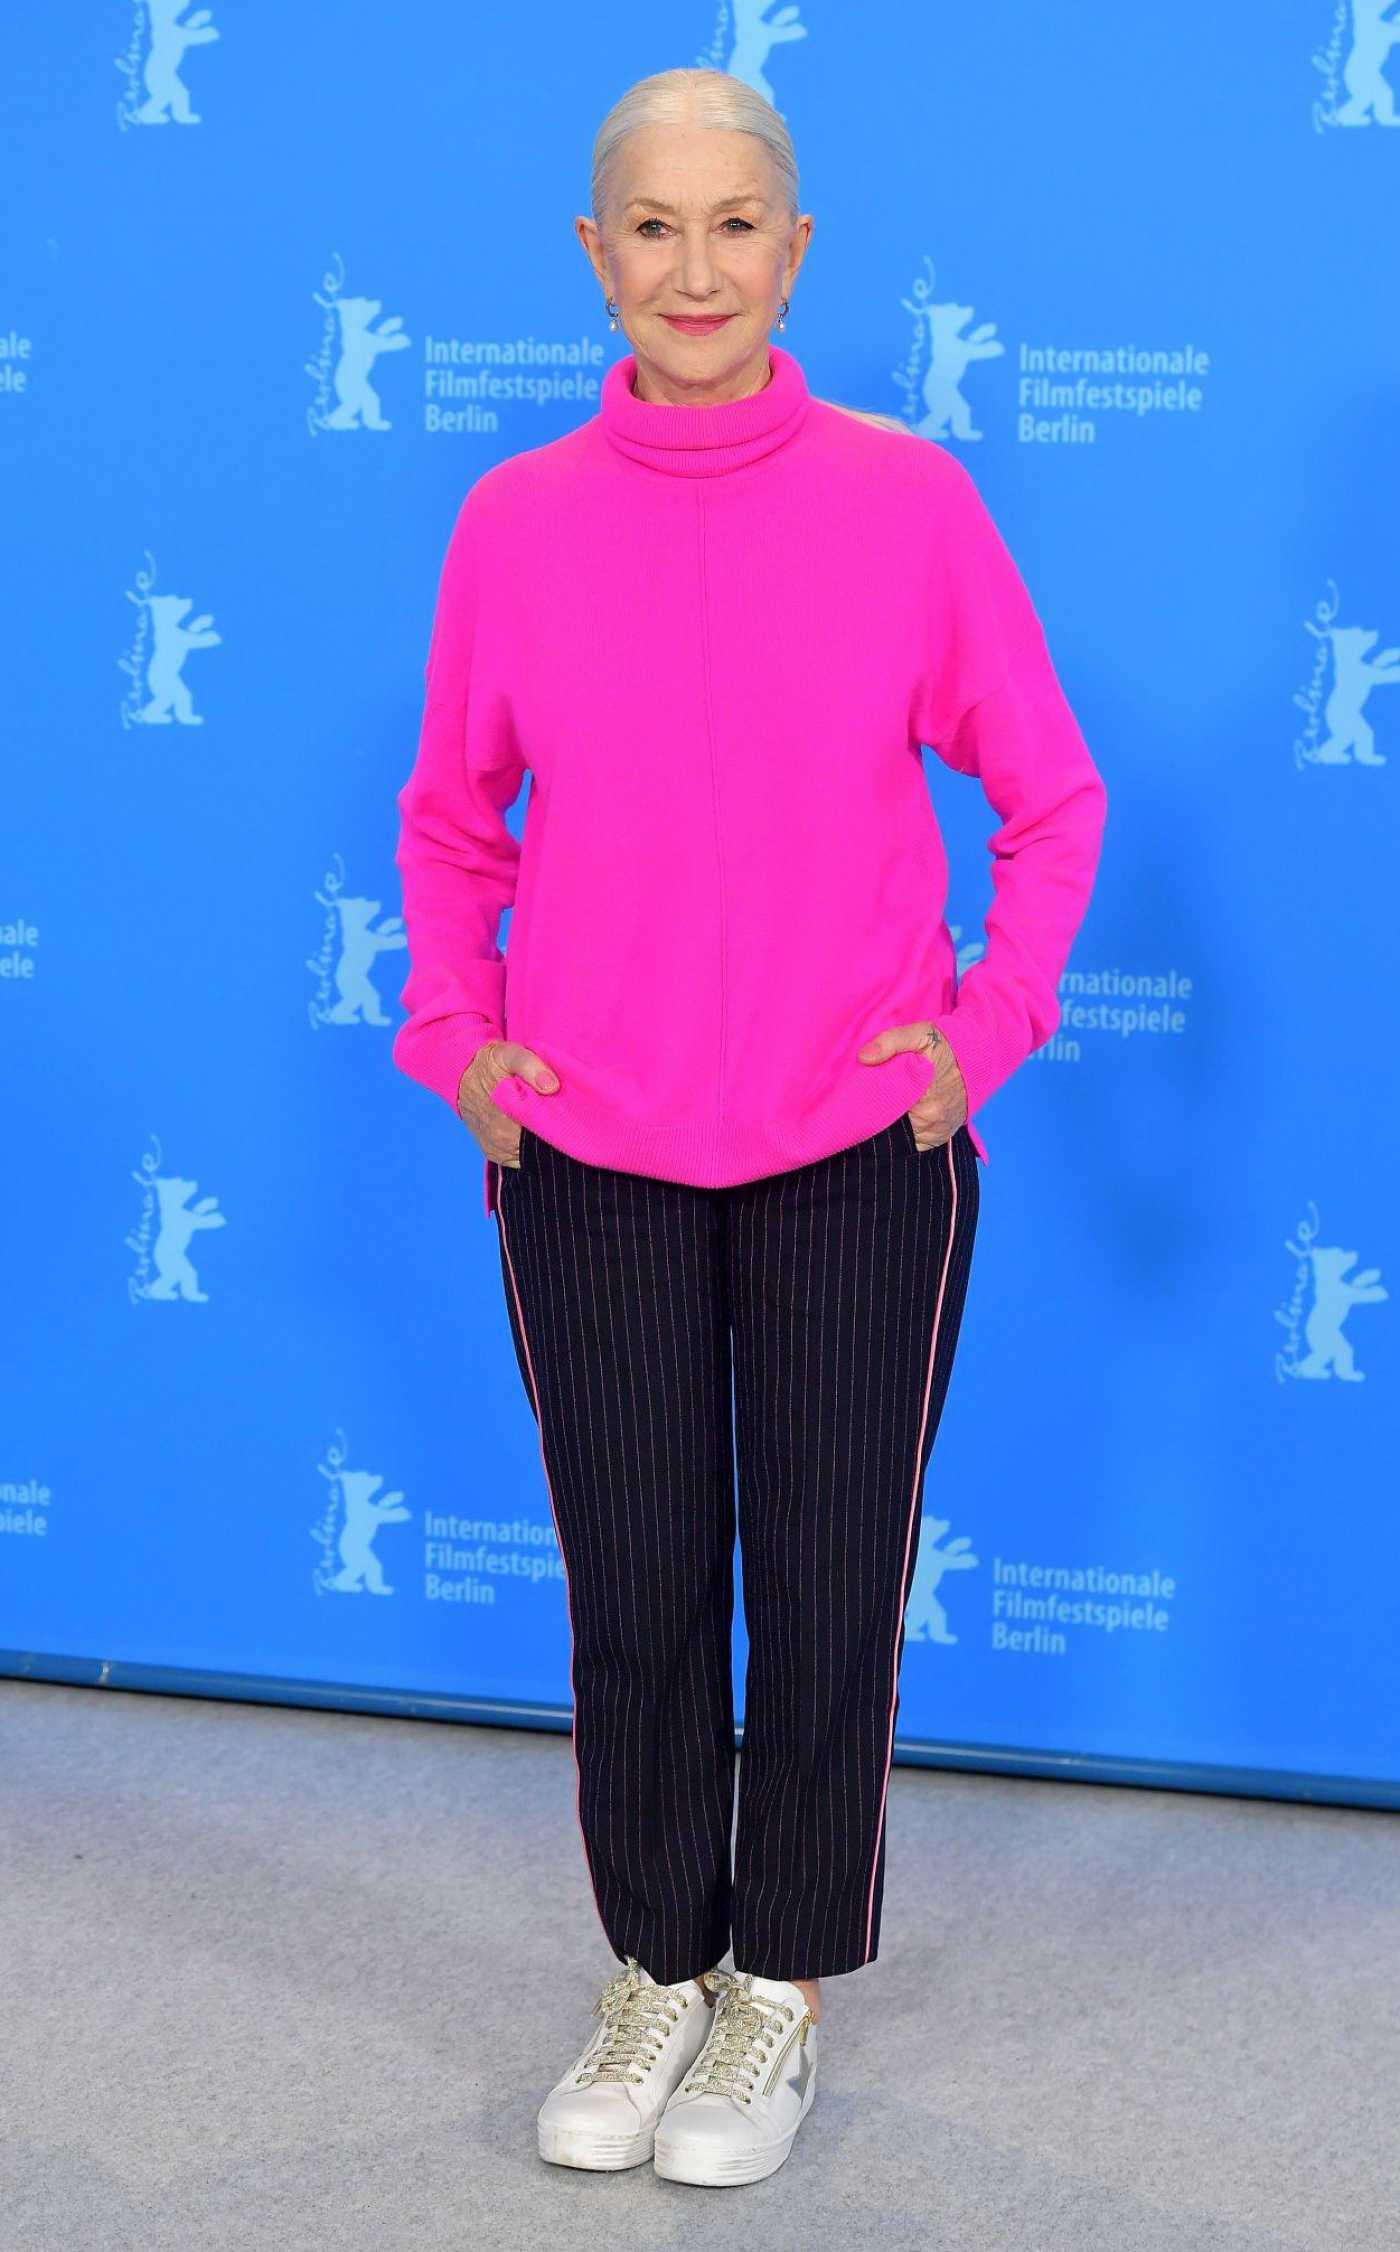 Helen Mirren Attends the Golda Photocall During the 73rd Berlinale International Film Festival in Berlin 02/20/2023